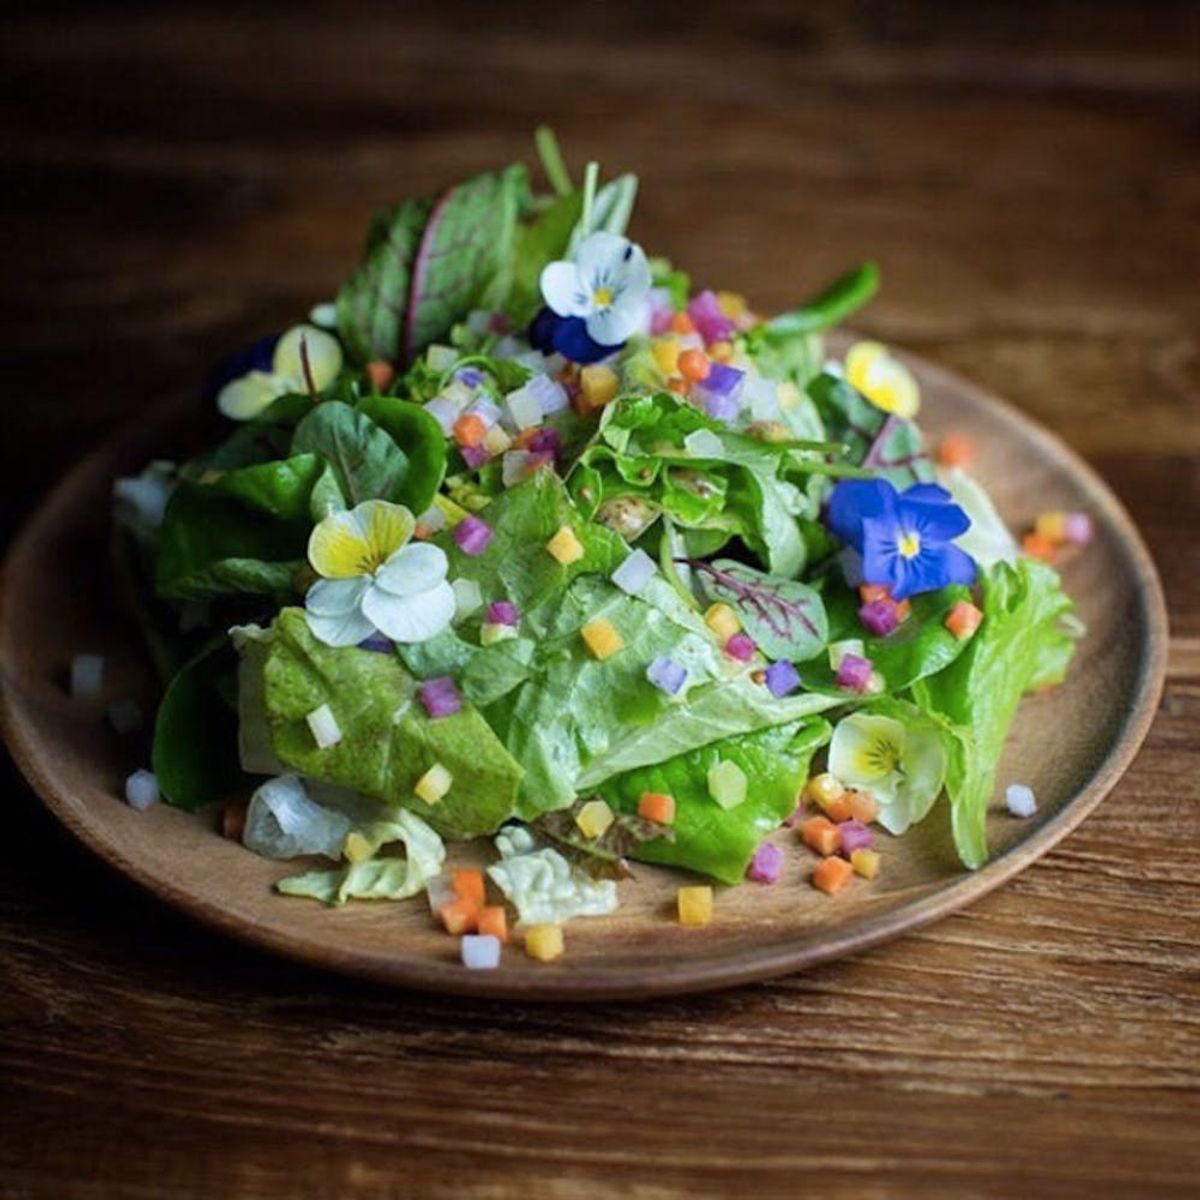 Get Psyched for Spring With These 12 Stunning Pics of Edible Flower Dishes